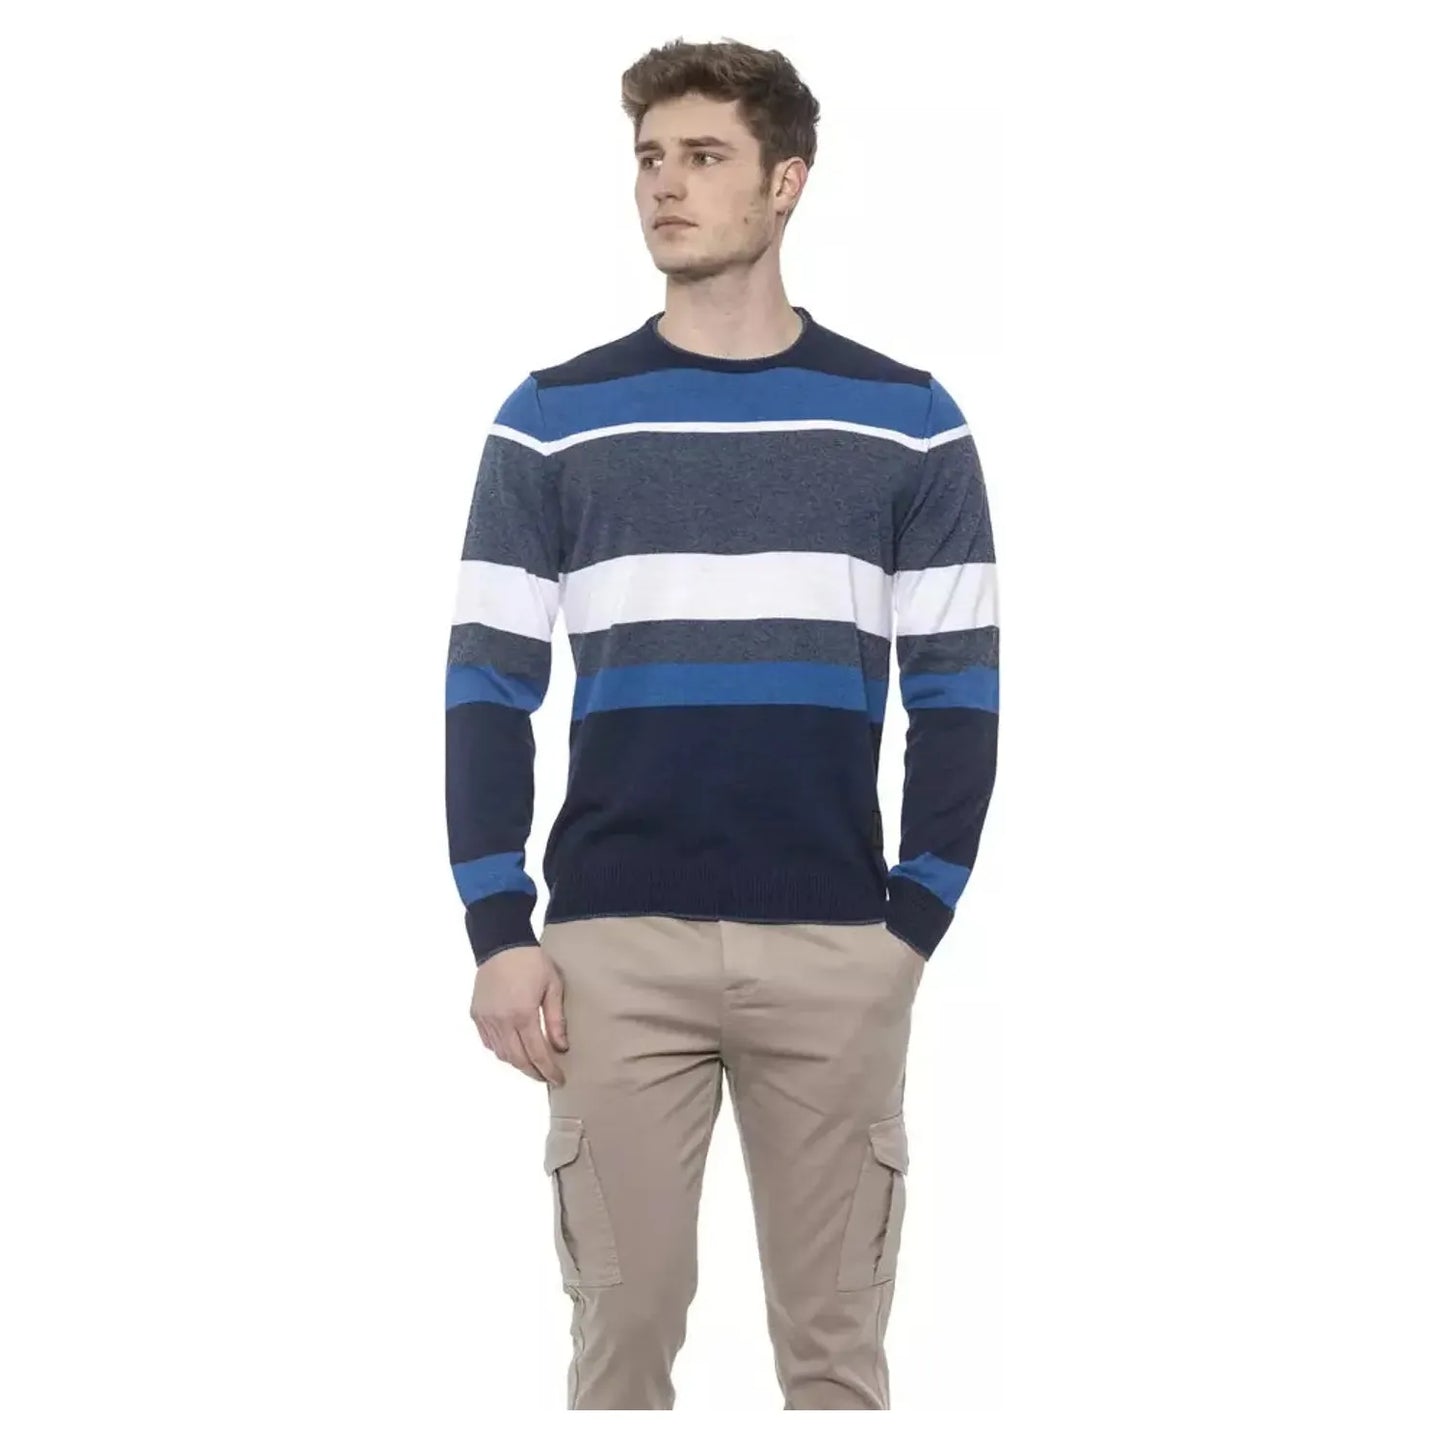 Conte of Florence Elegant Striped Crewneck Sweater in Blue prussianblue-sweater-4 stock_product_image_20327_1510640330-28-916171a1-33a.webp